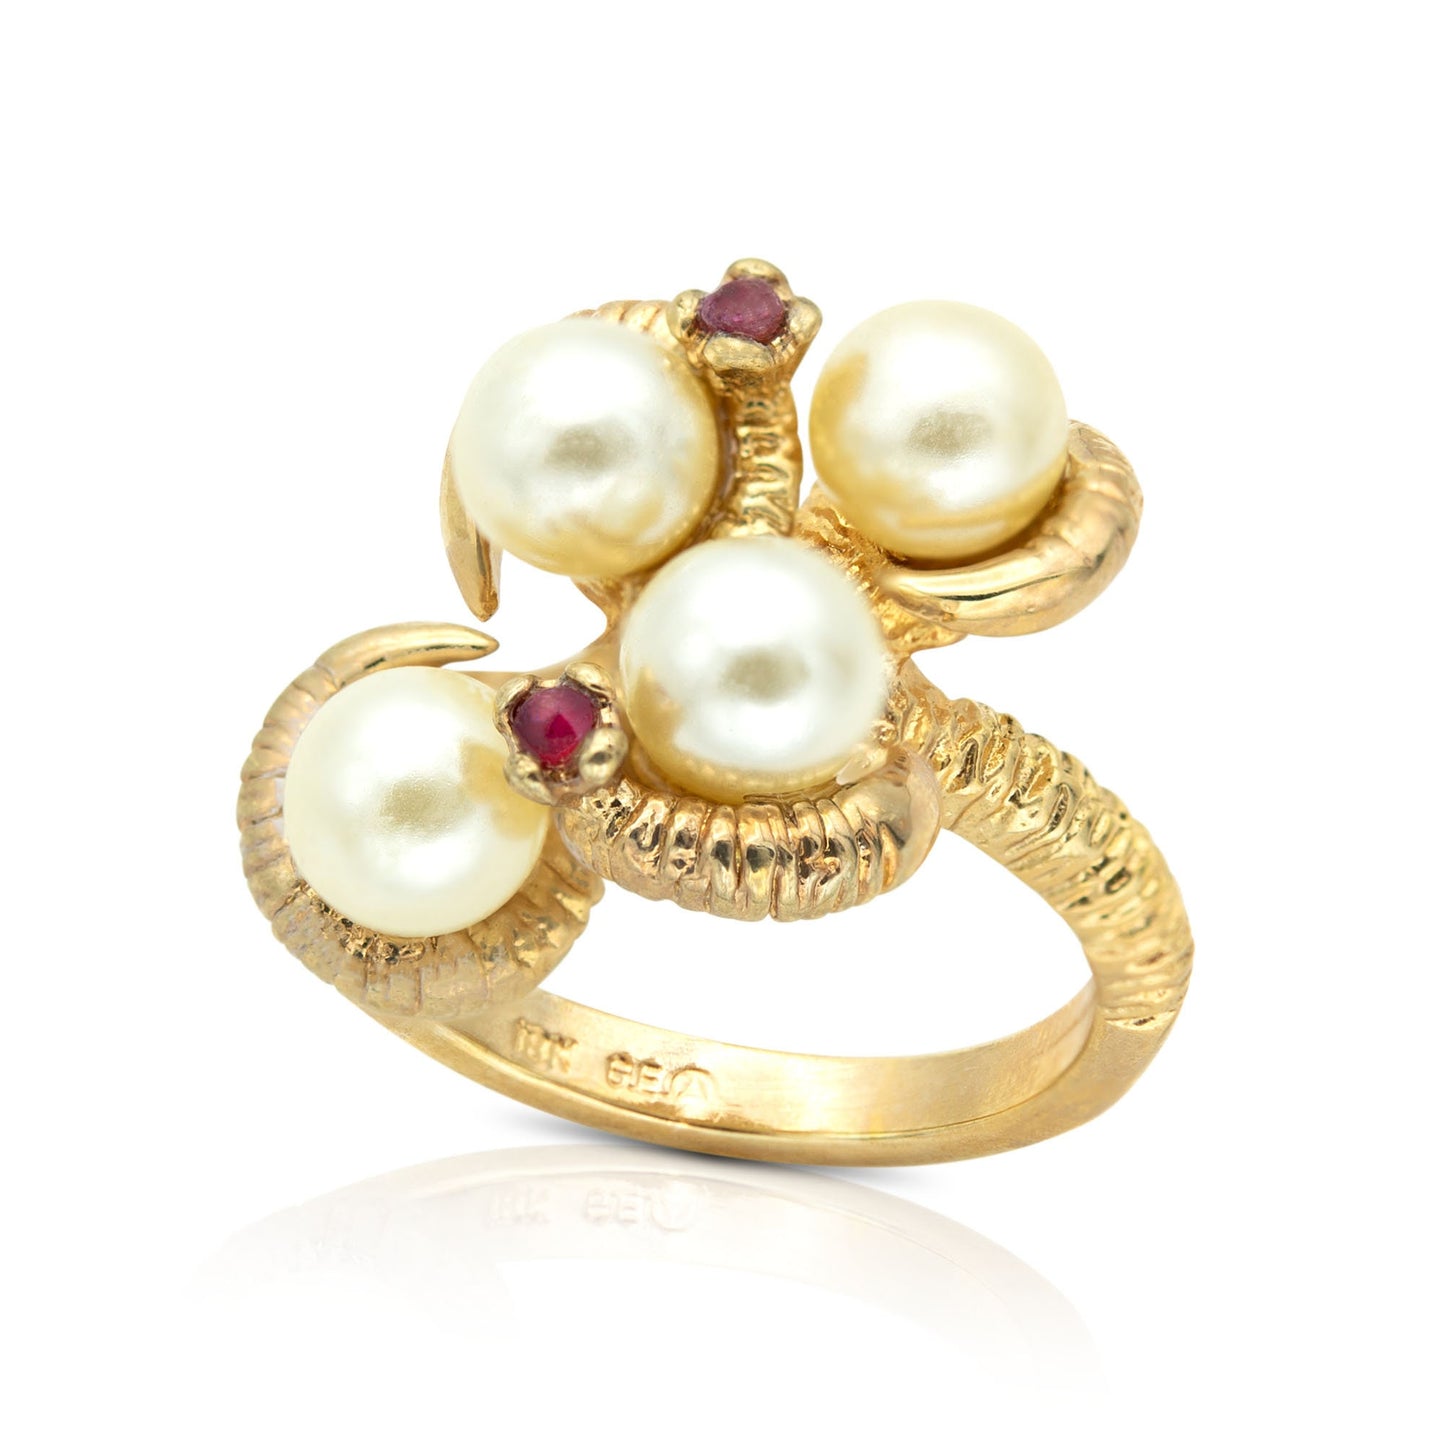 A Vintage Pearl Beads with Genuine Ruby Accents 18k Gold Electroplated #R761